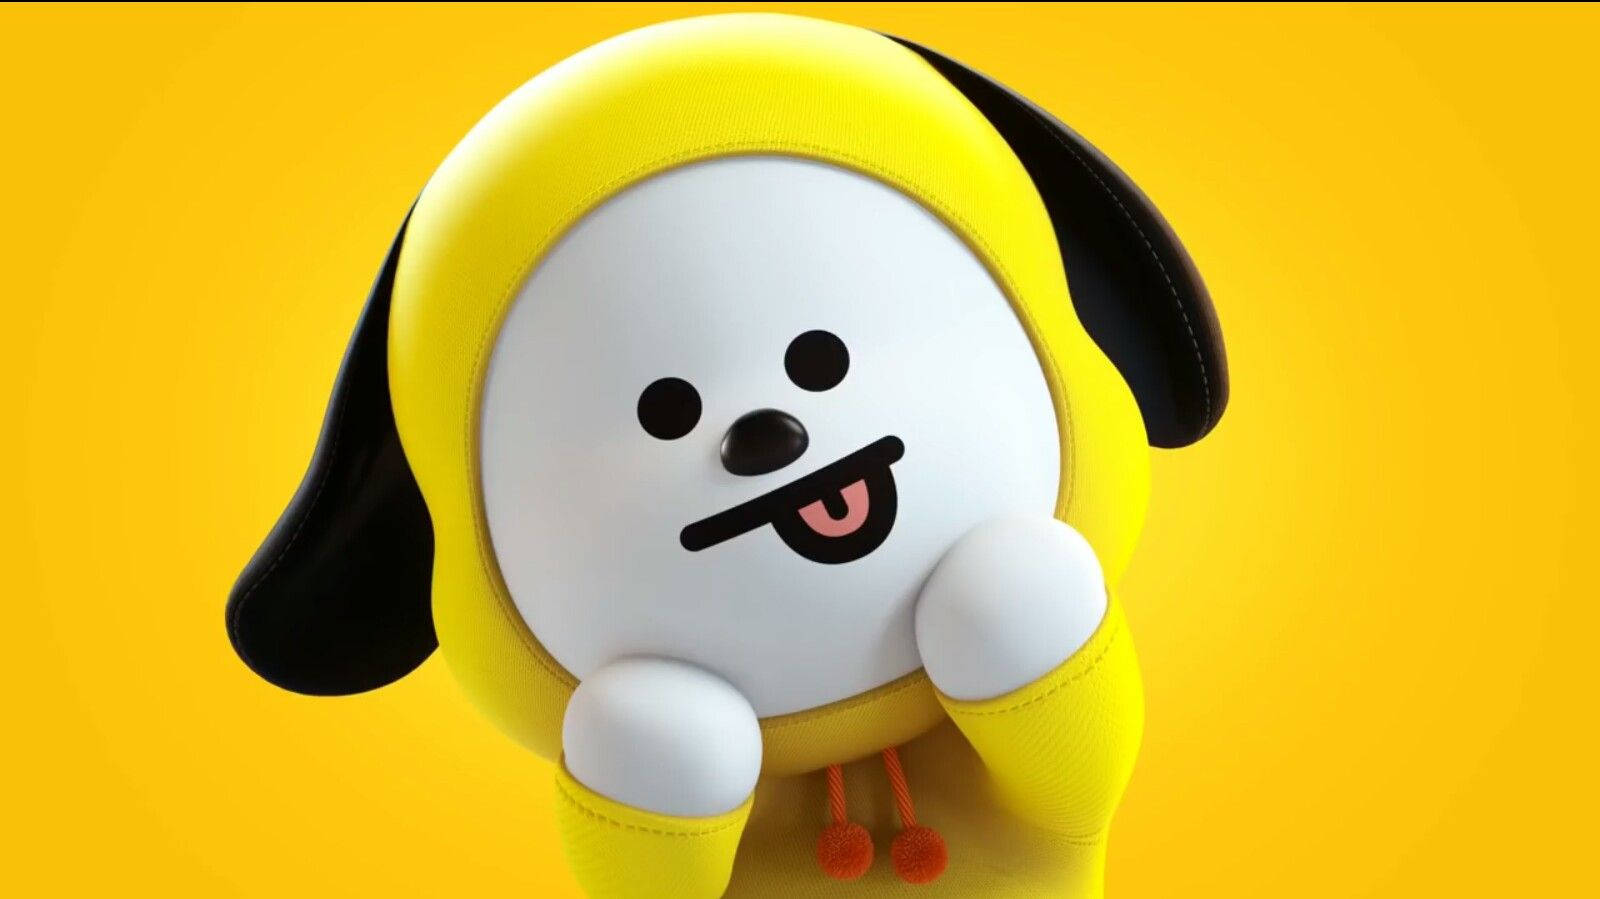 Adorable Chimmy BT21 Stuffed Toy Wallpaper